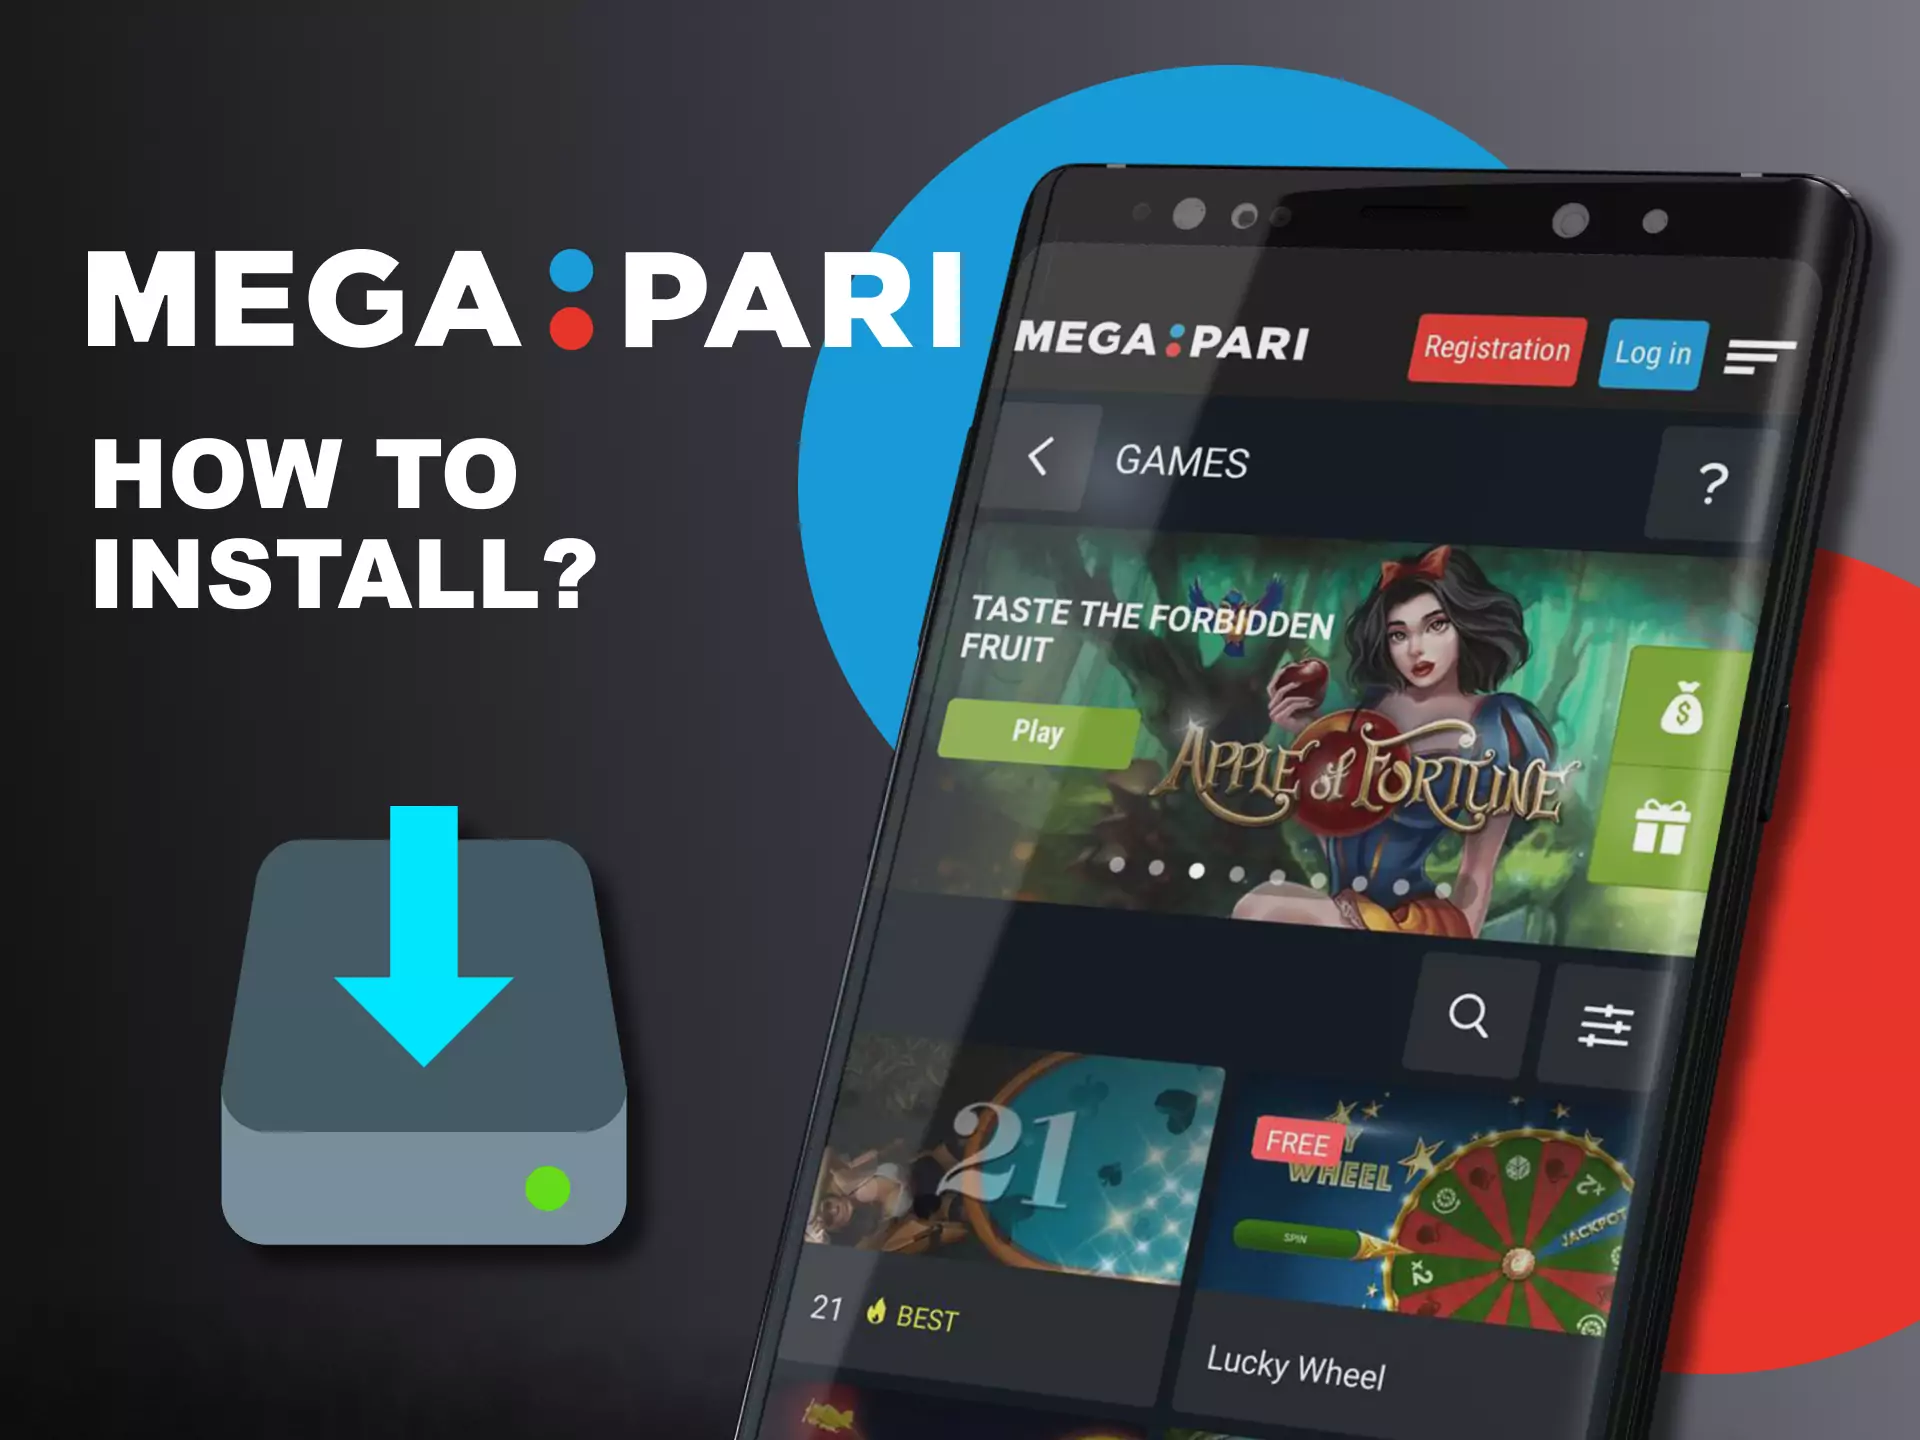 With these instructions, install the Megapari app on your device.